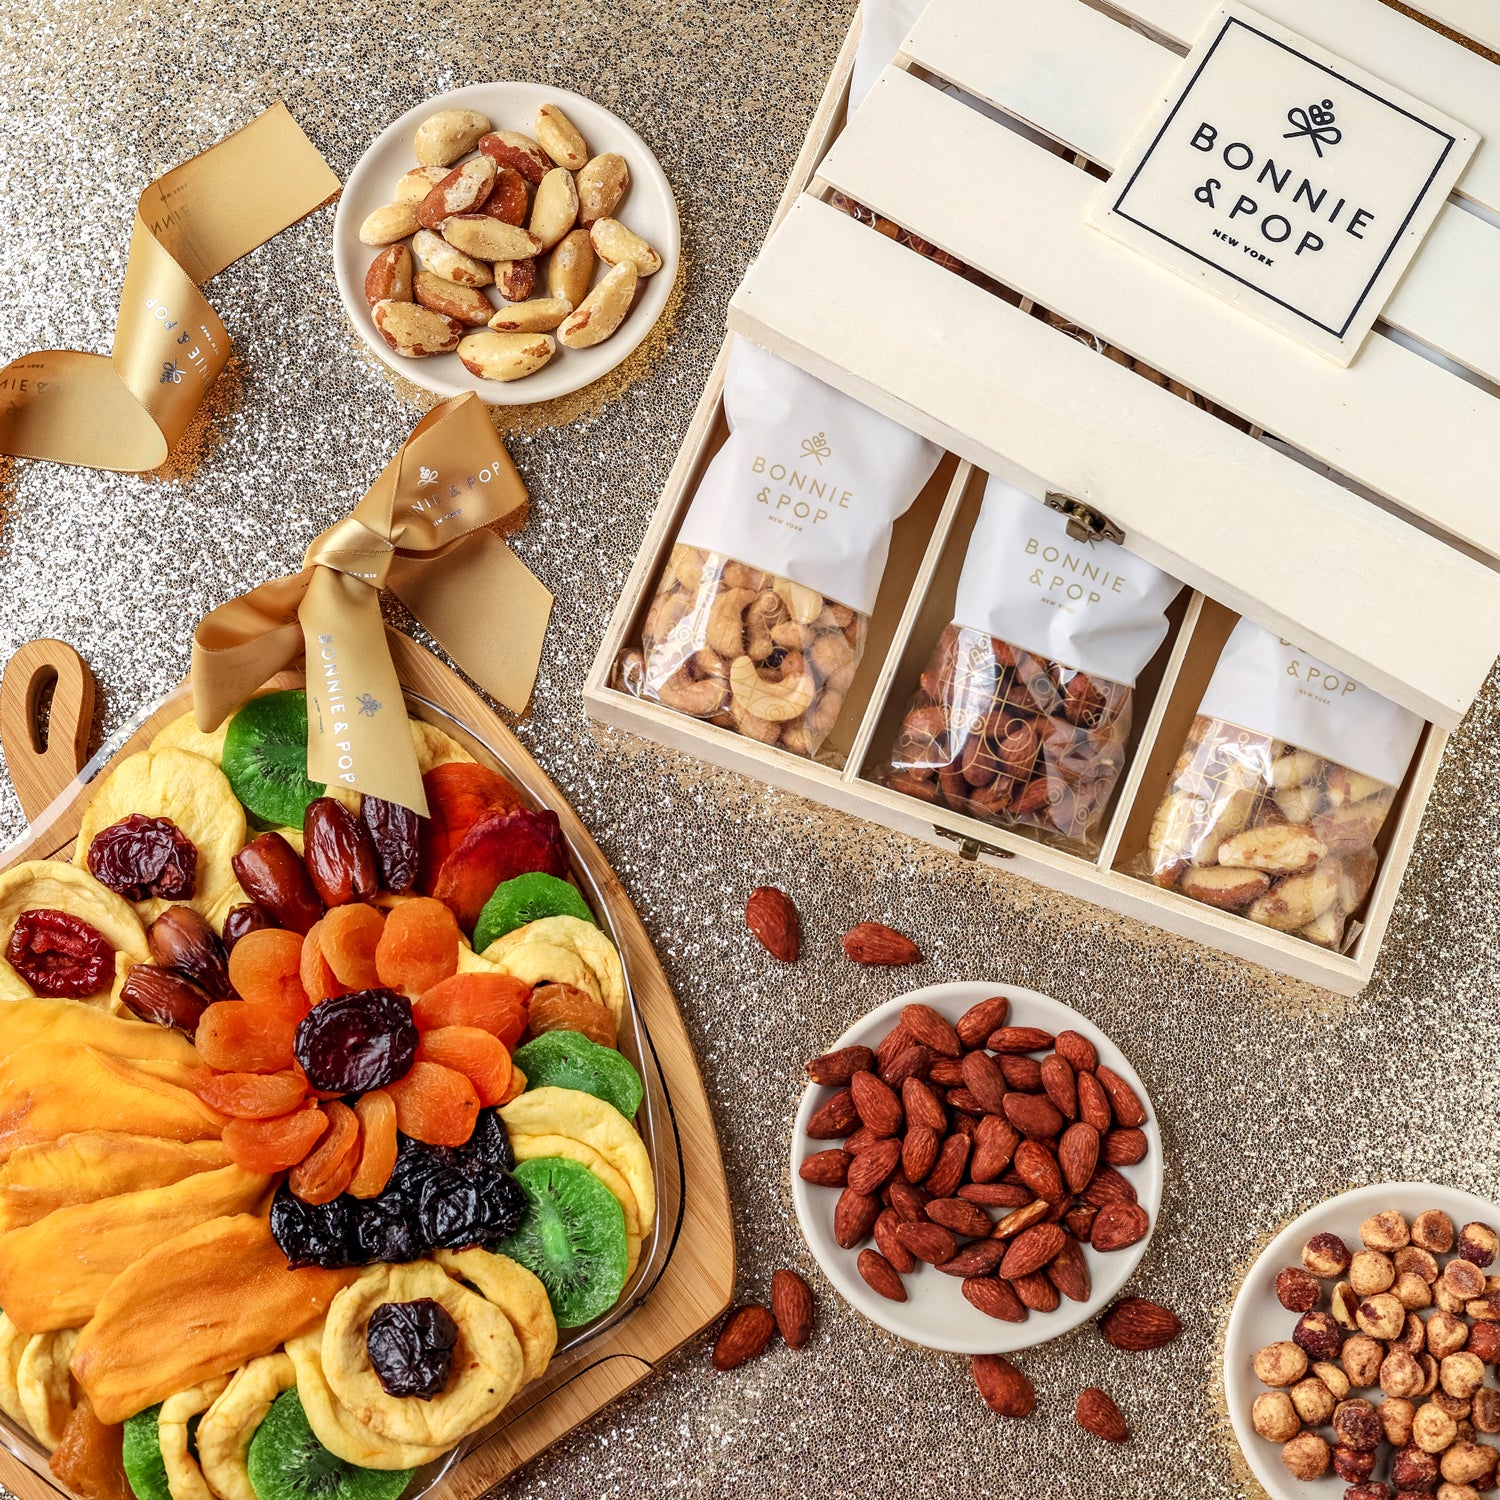 Buy dried fruits & nuts gift boxes 650g online in Delhi India at Nutsgram